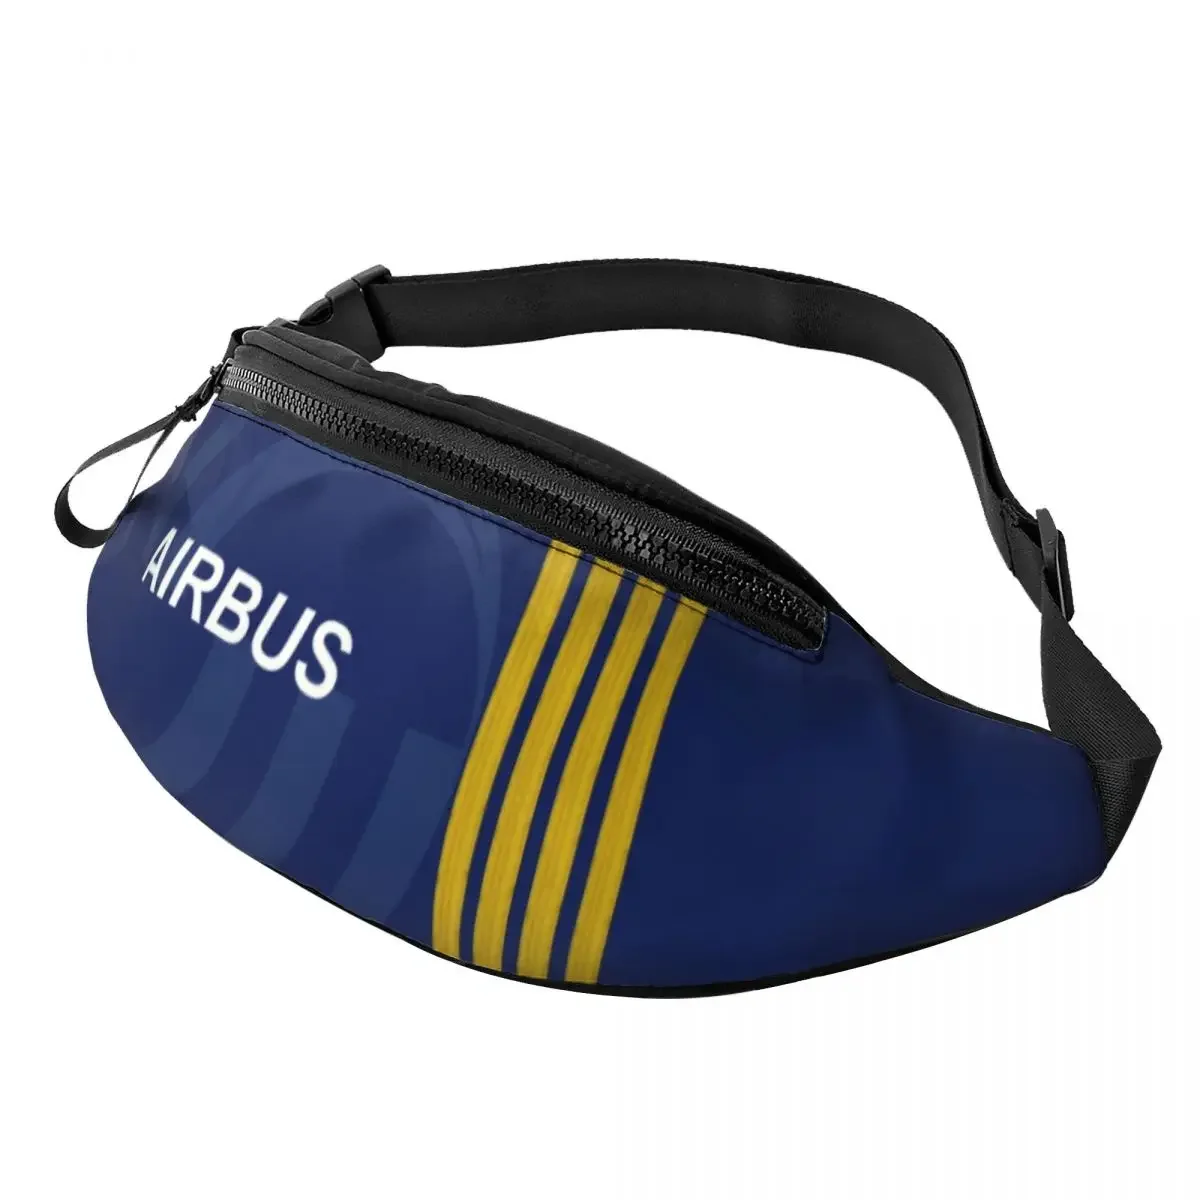 

Airbus Fighter Pilot Fanny Pack for Women Men Cool Aviation Airplane Crossbody Waist Bag Traveling Phone Money Pouch